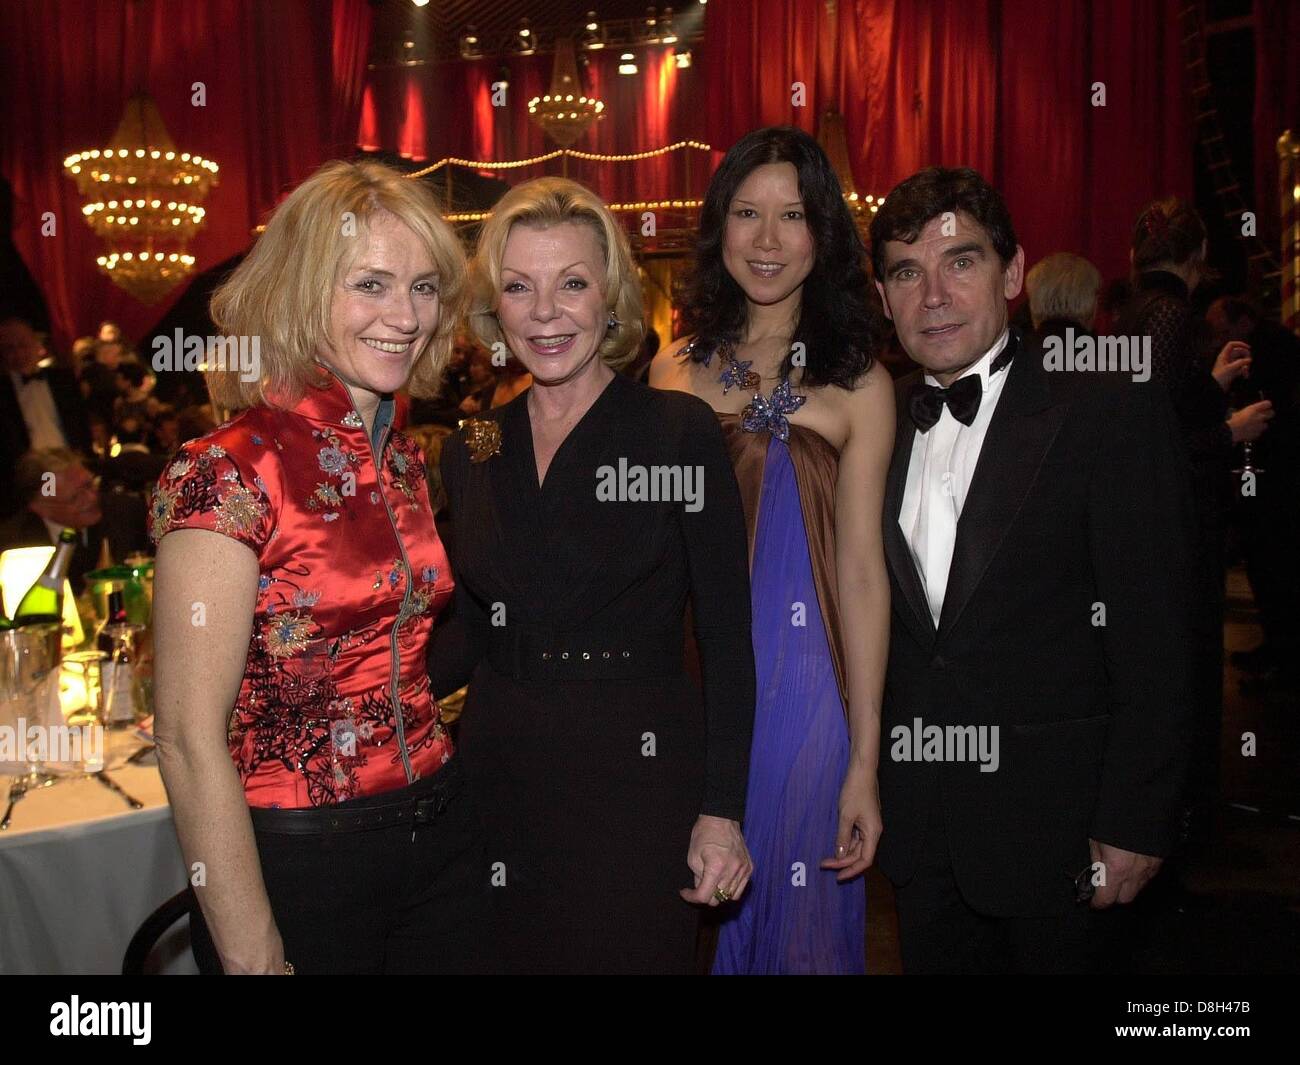 Isabelle Huppert (l), a friend (2nd of left, not identified), French ambassador Claude Martin (r) and his wife Judith Martin (2nd of right) at the European Film Award 2001 in Berlin. Stock Photo